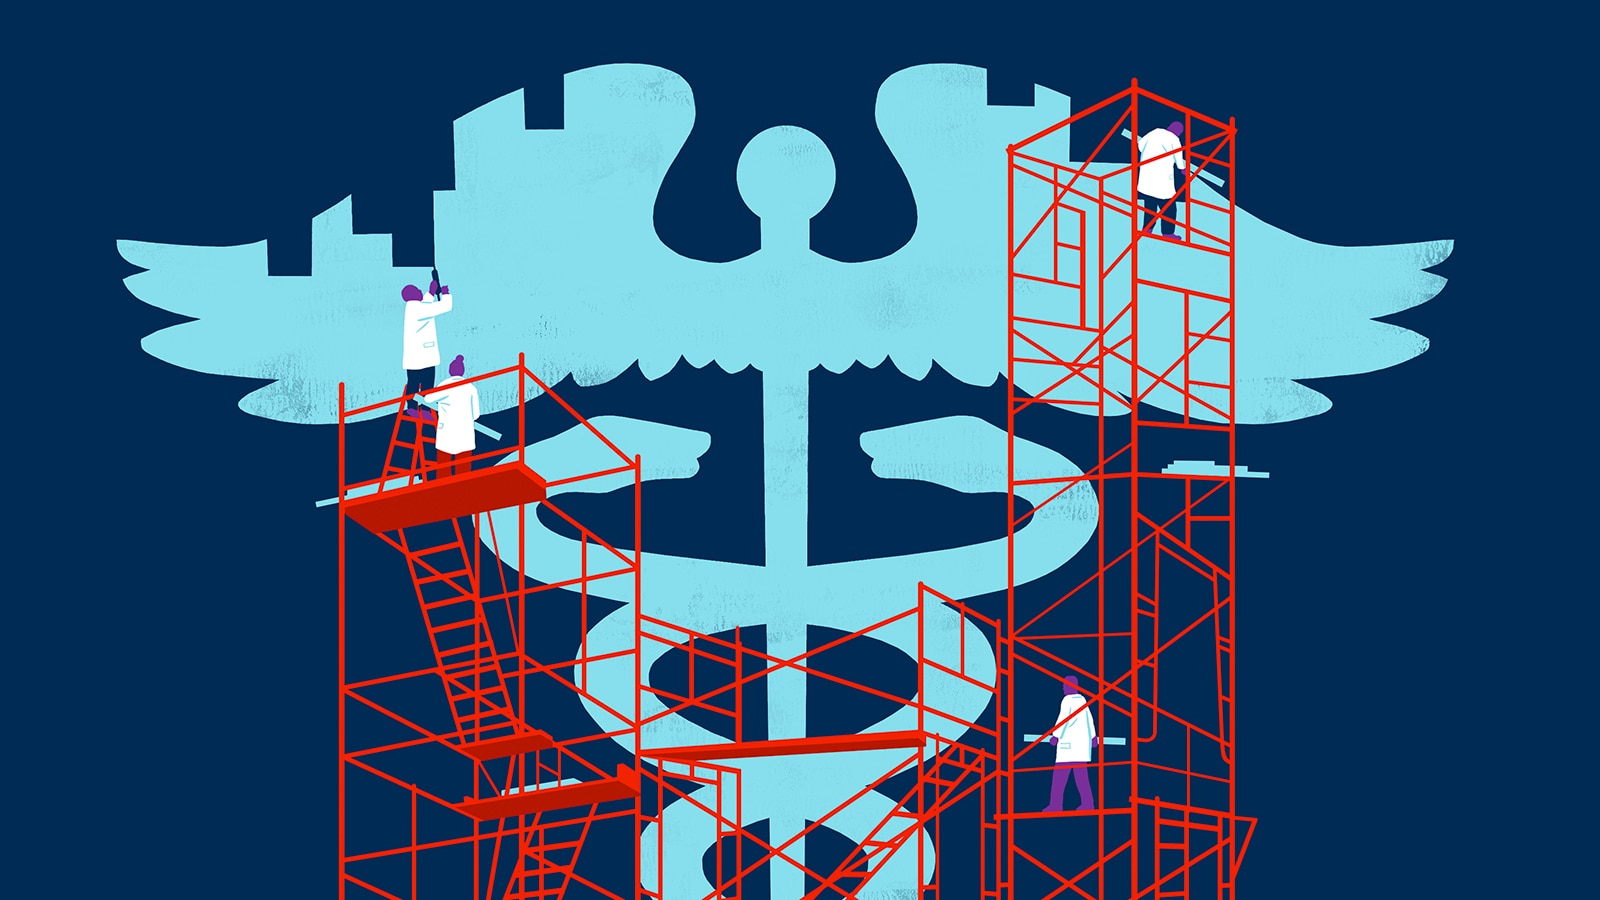 People on scaffolds repair a large caduceus